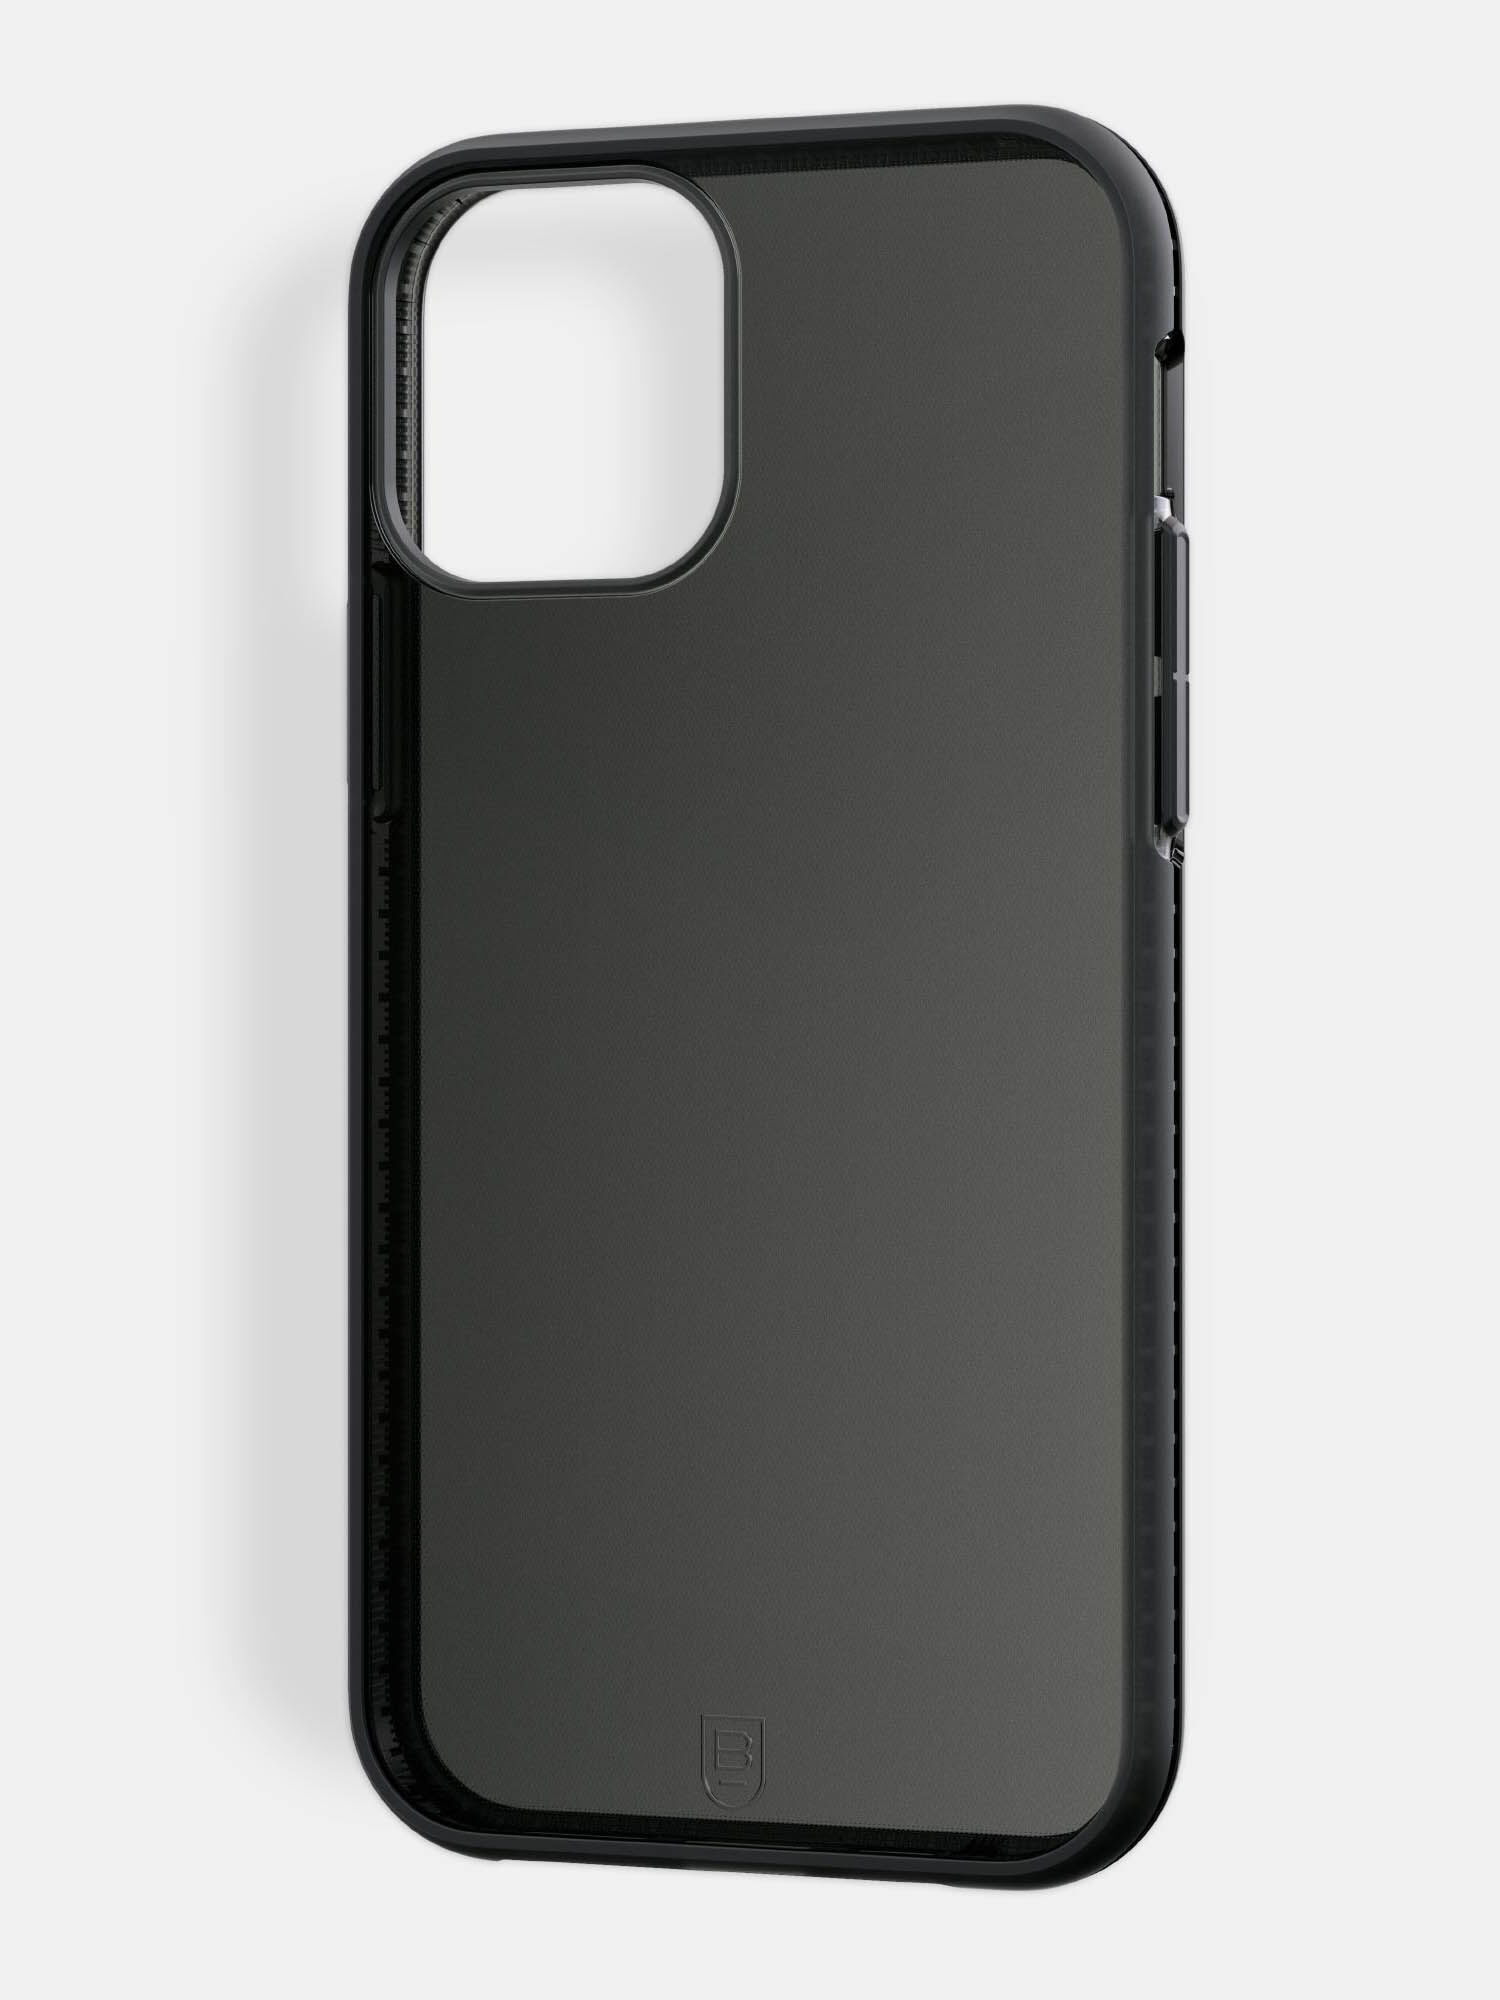 Apple iPhone 12 Cases, Screen Protectors, Covers & Skins